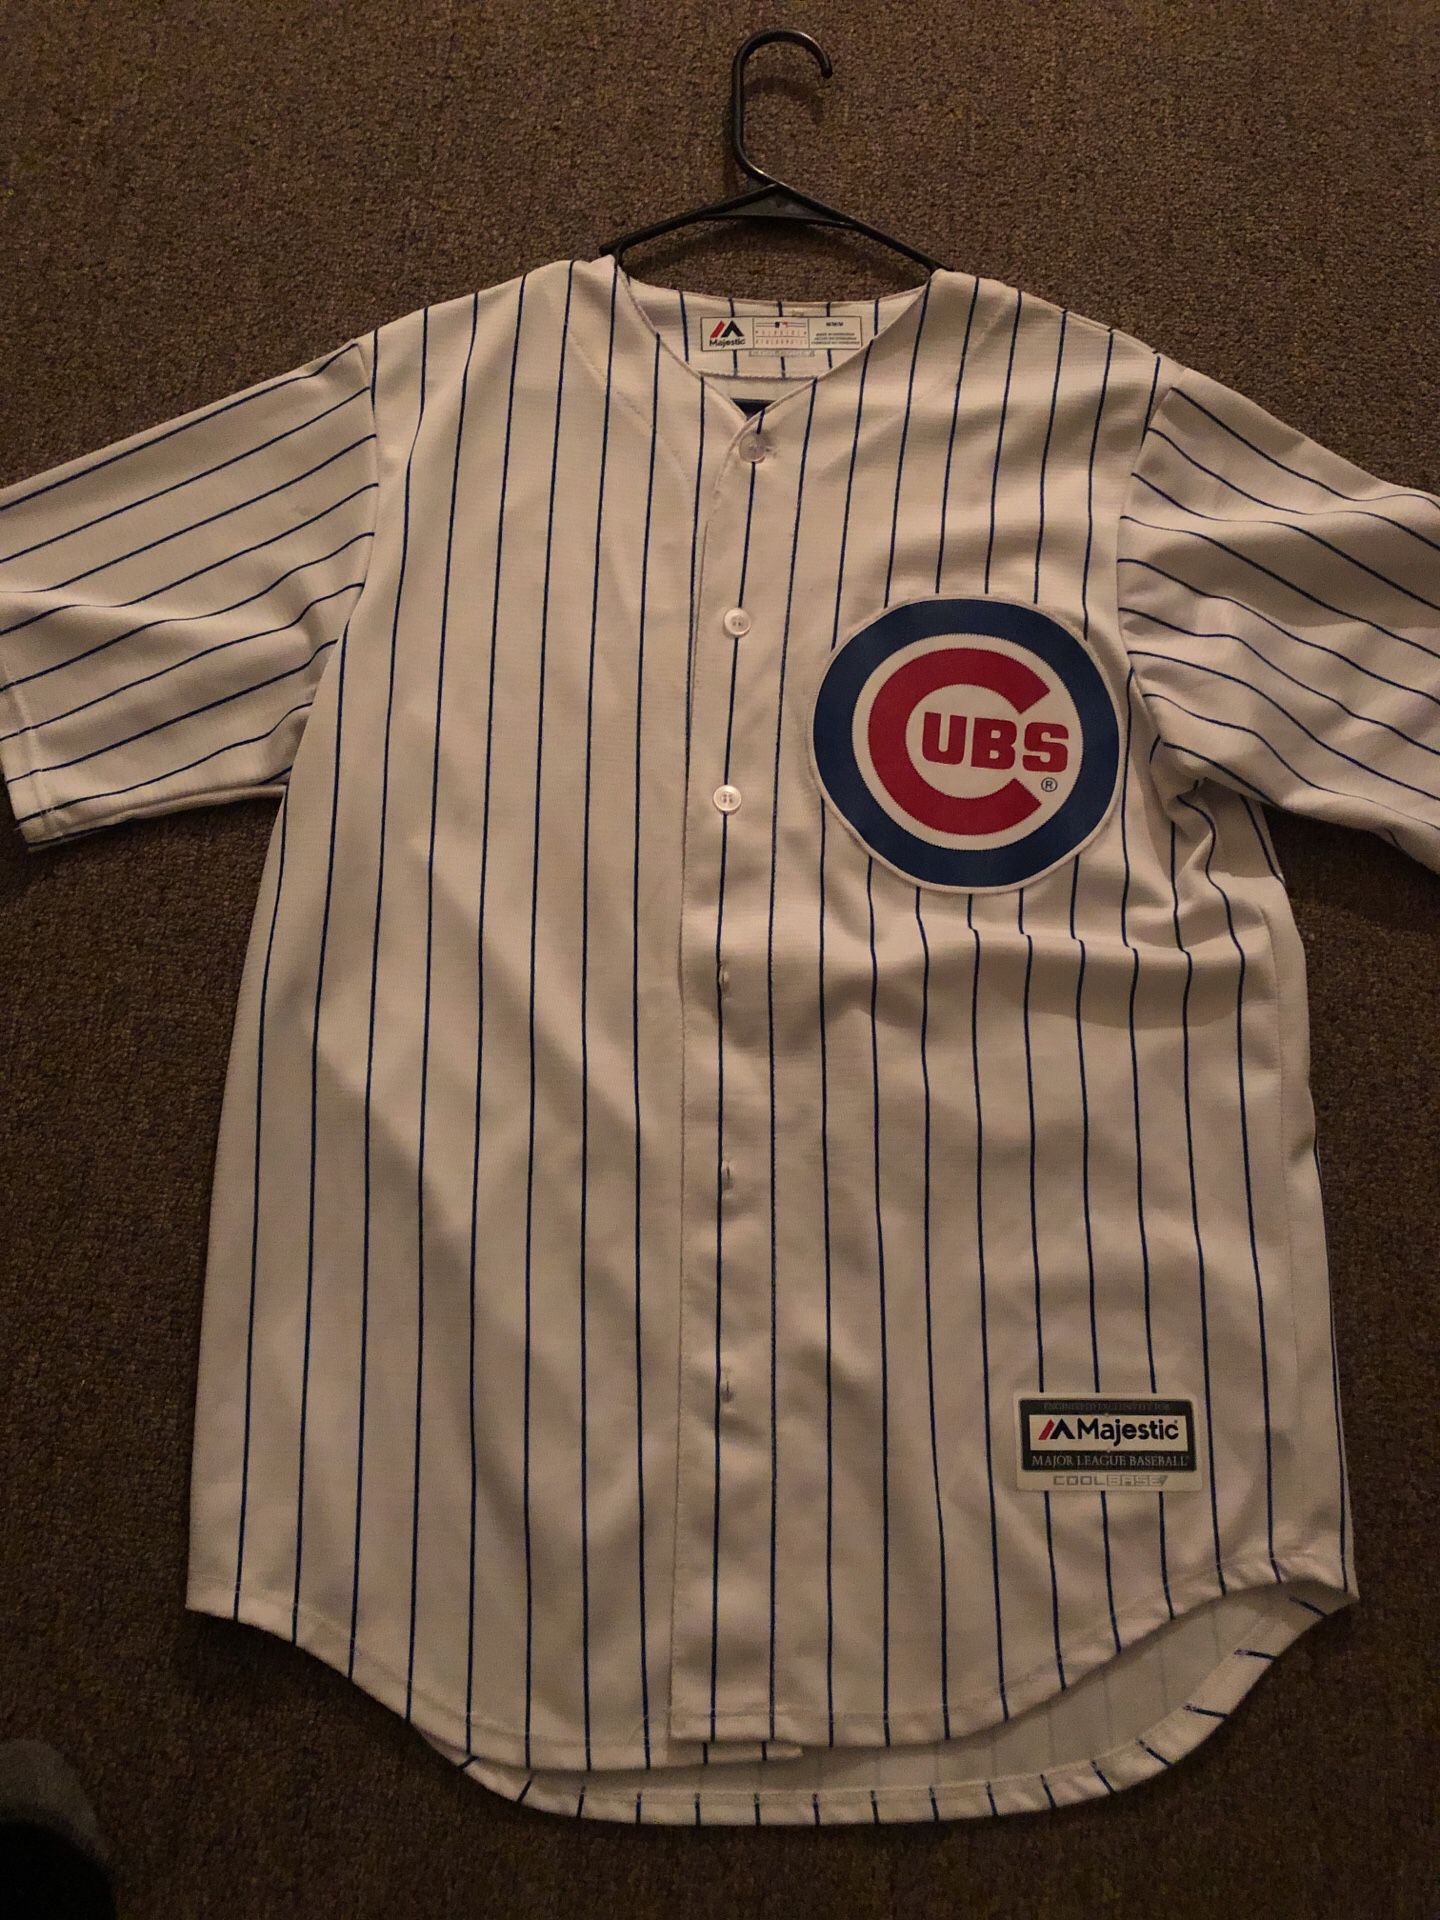 Cubs jersey size large